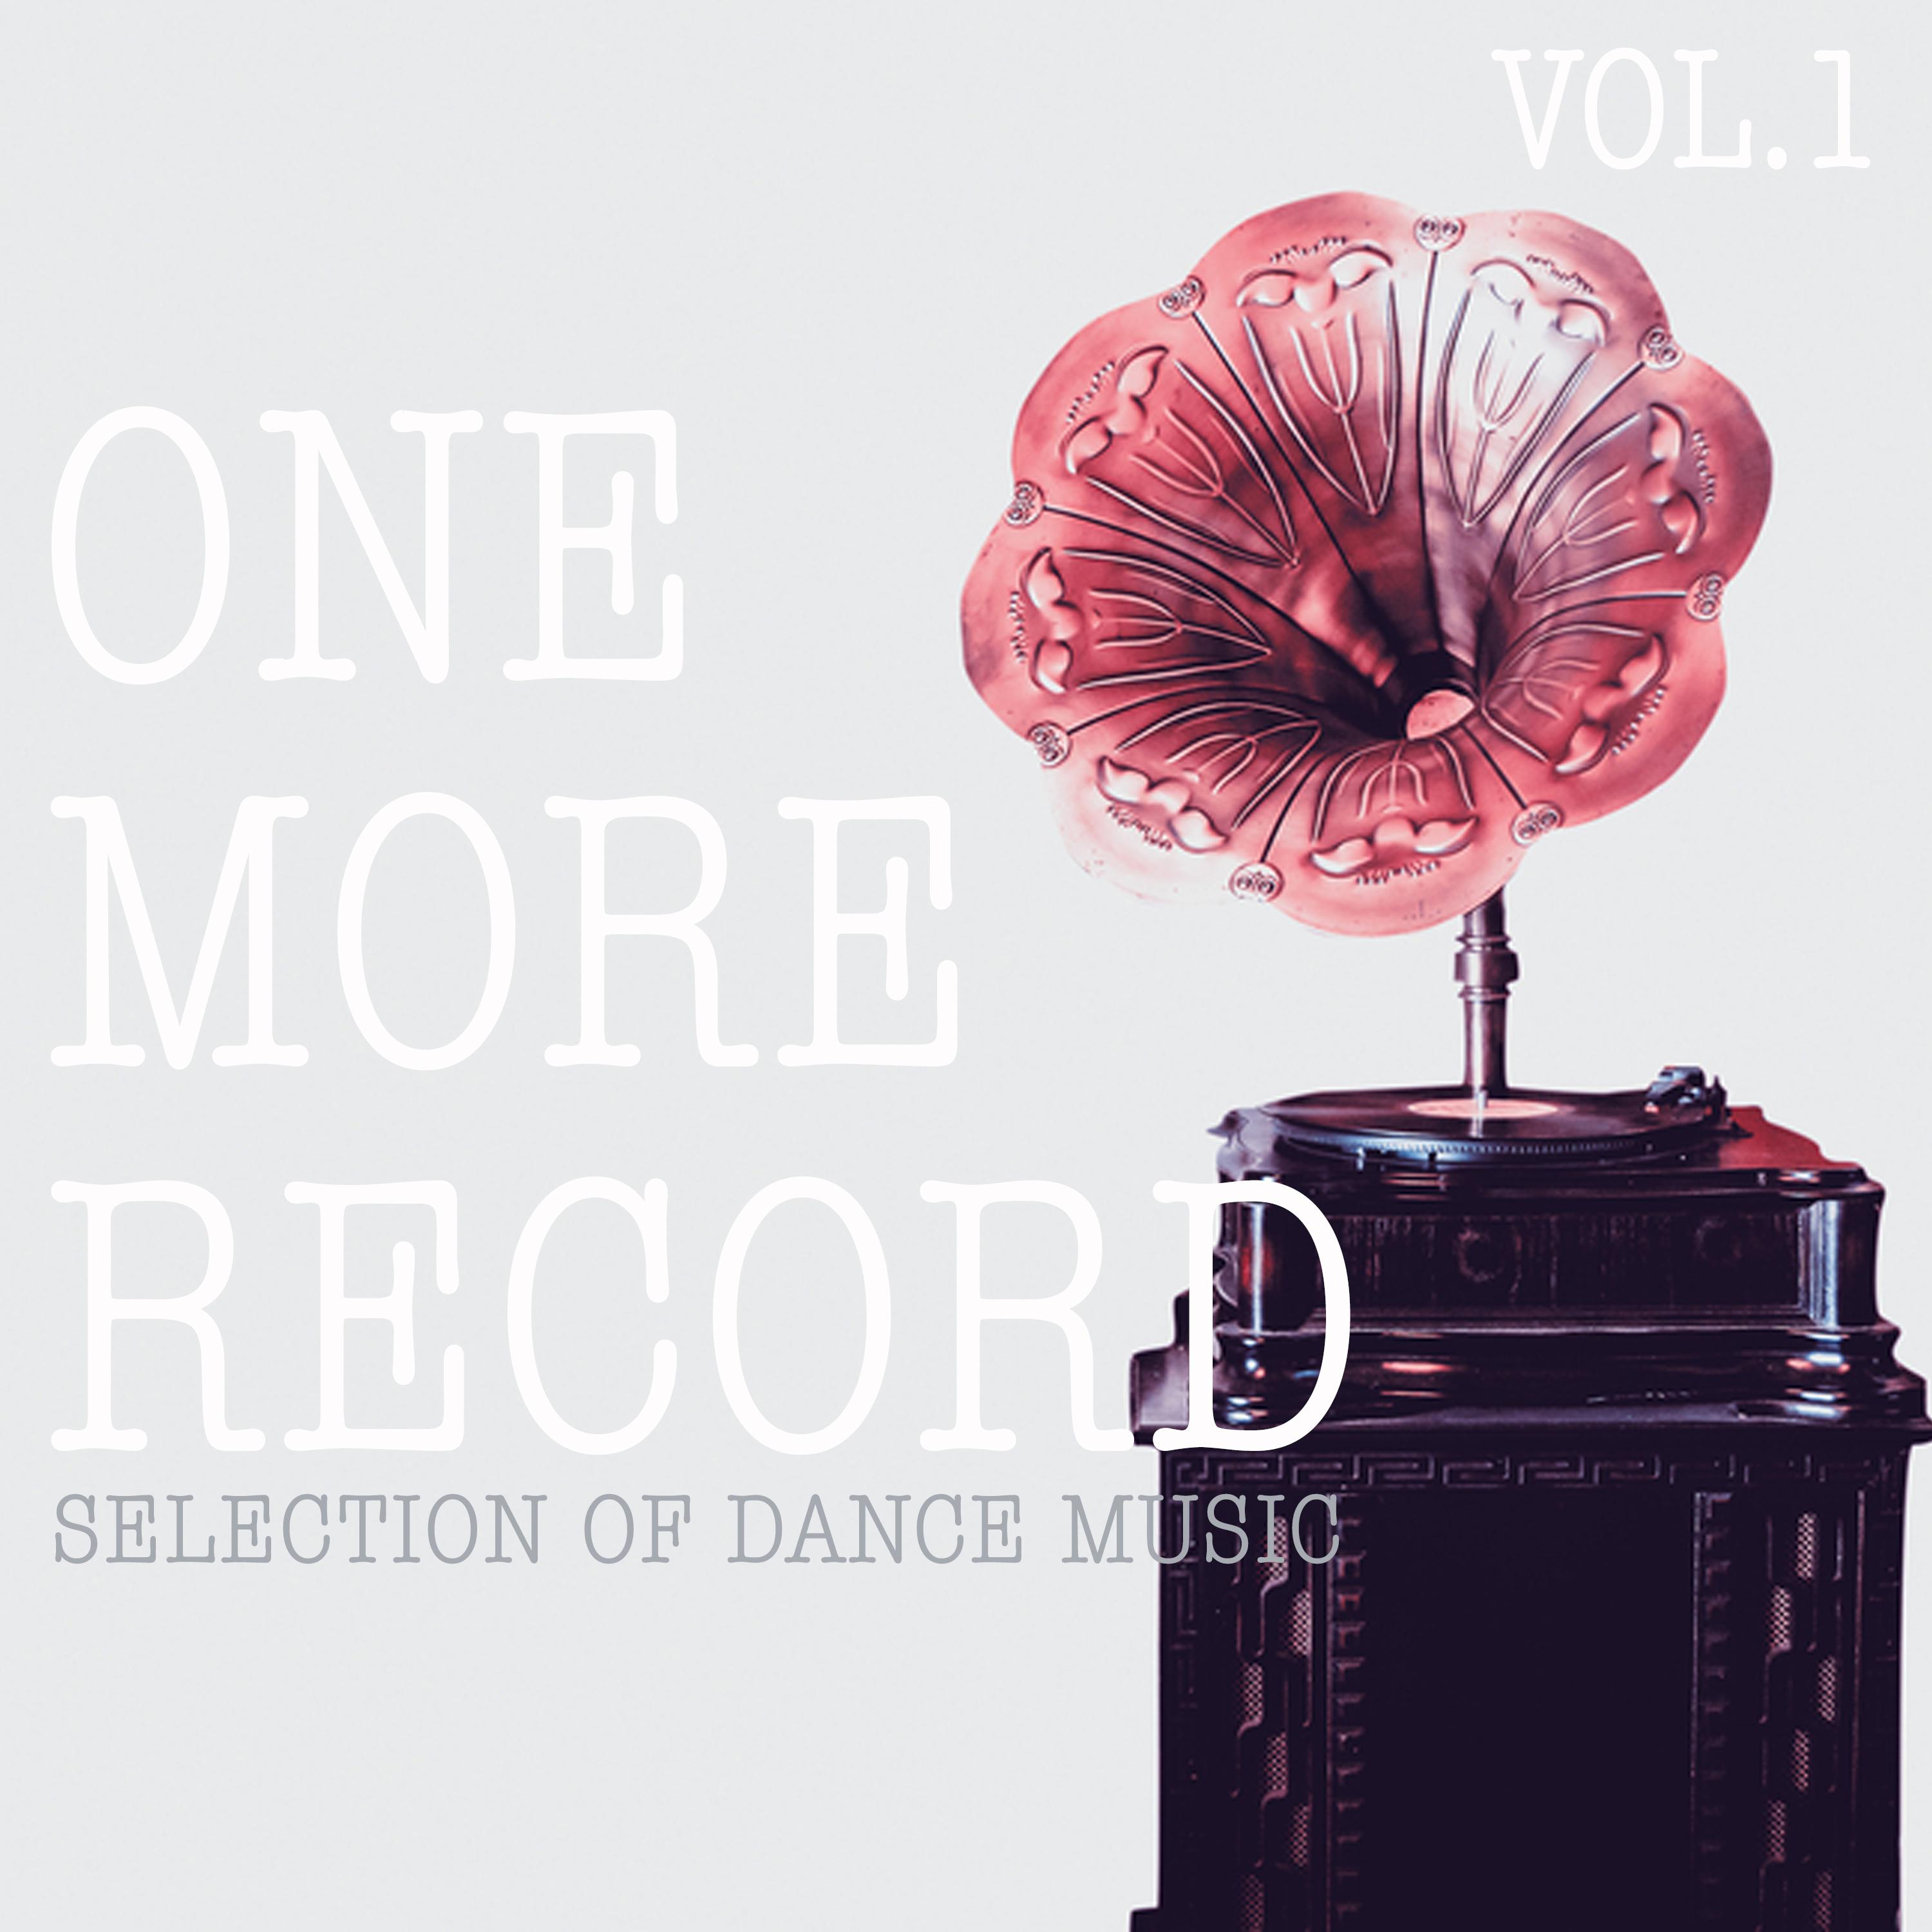 One More Record, Vol. 1 - Selection of Dance Music